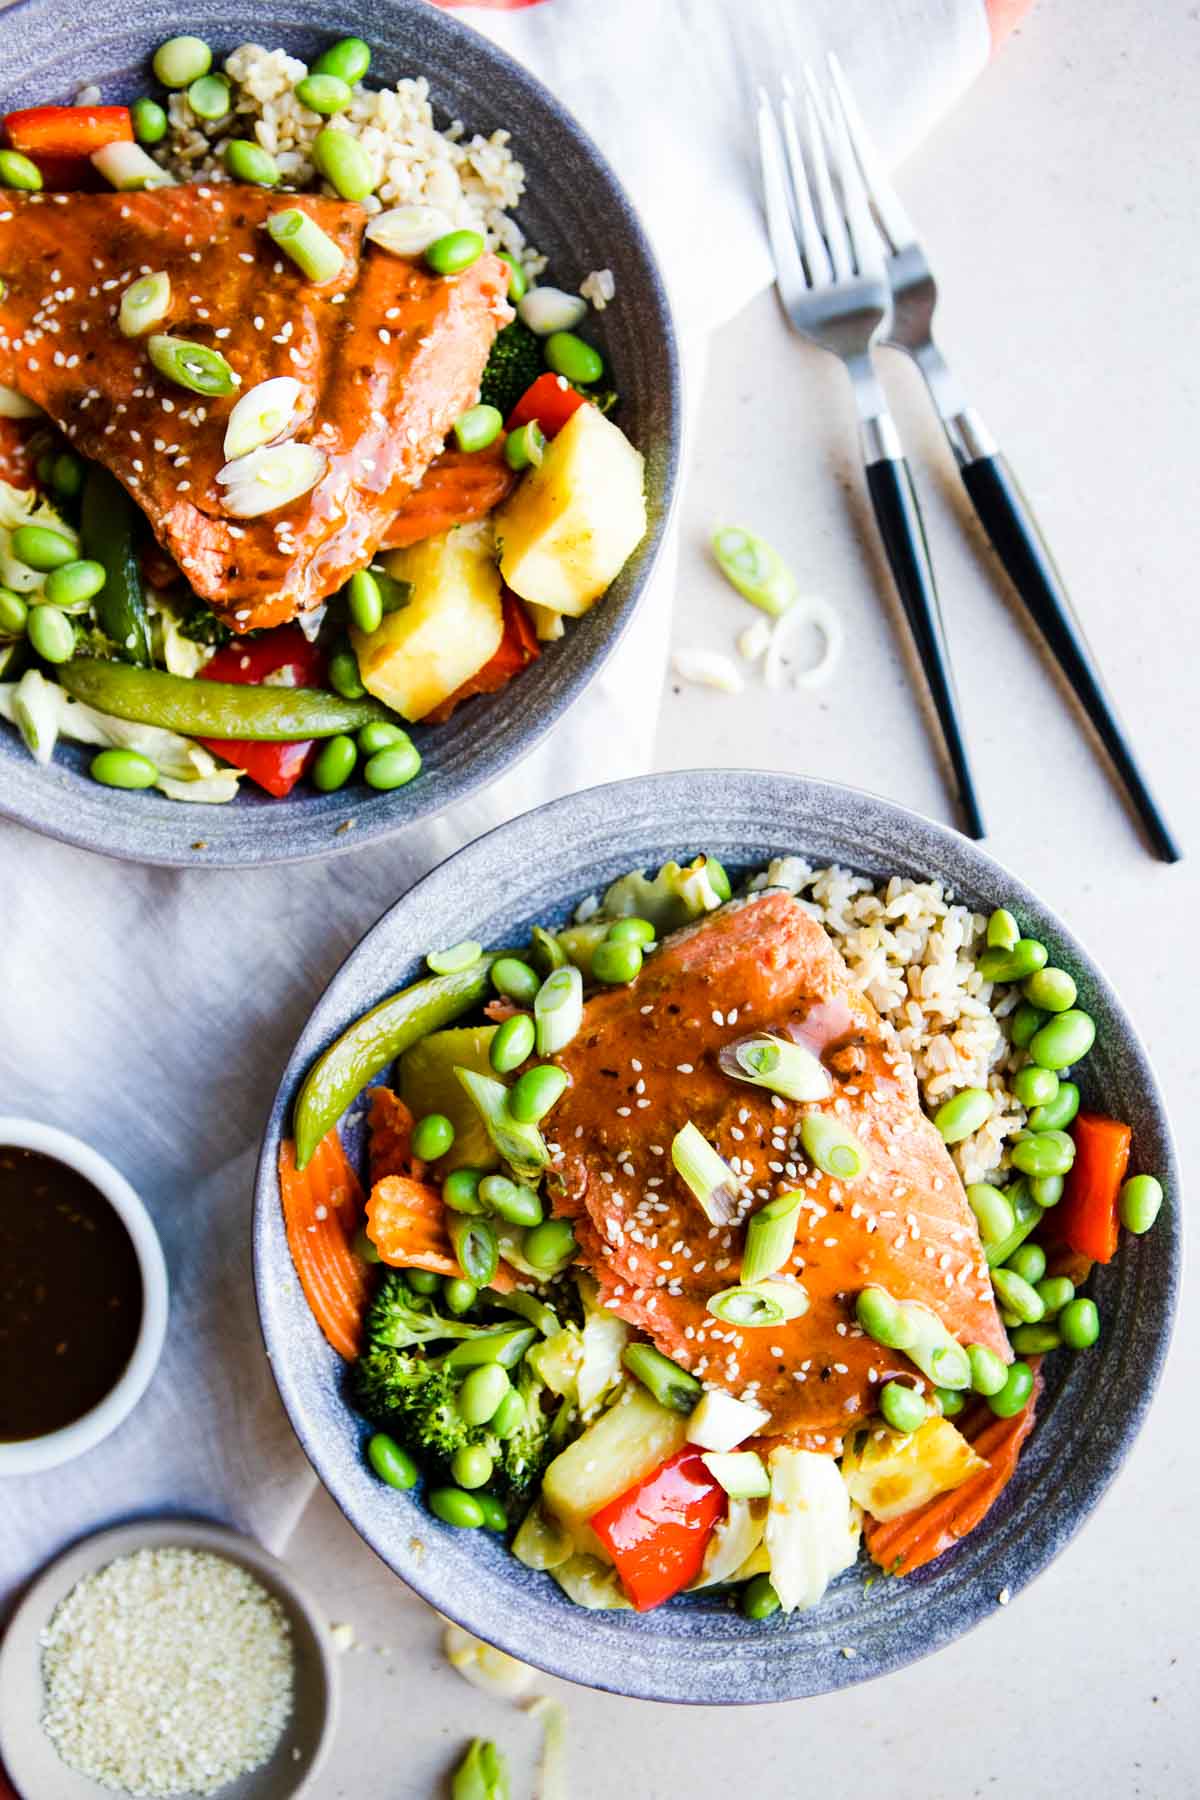 2 gray bowls filled with rice, vegetables, pineapple and salmon teriyaki 